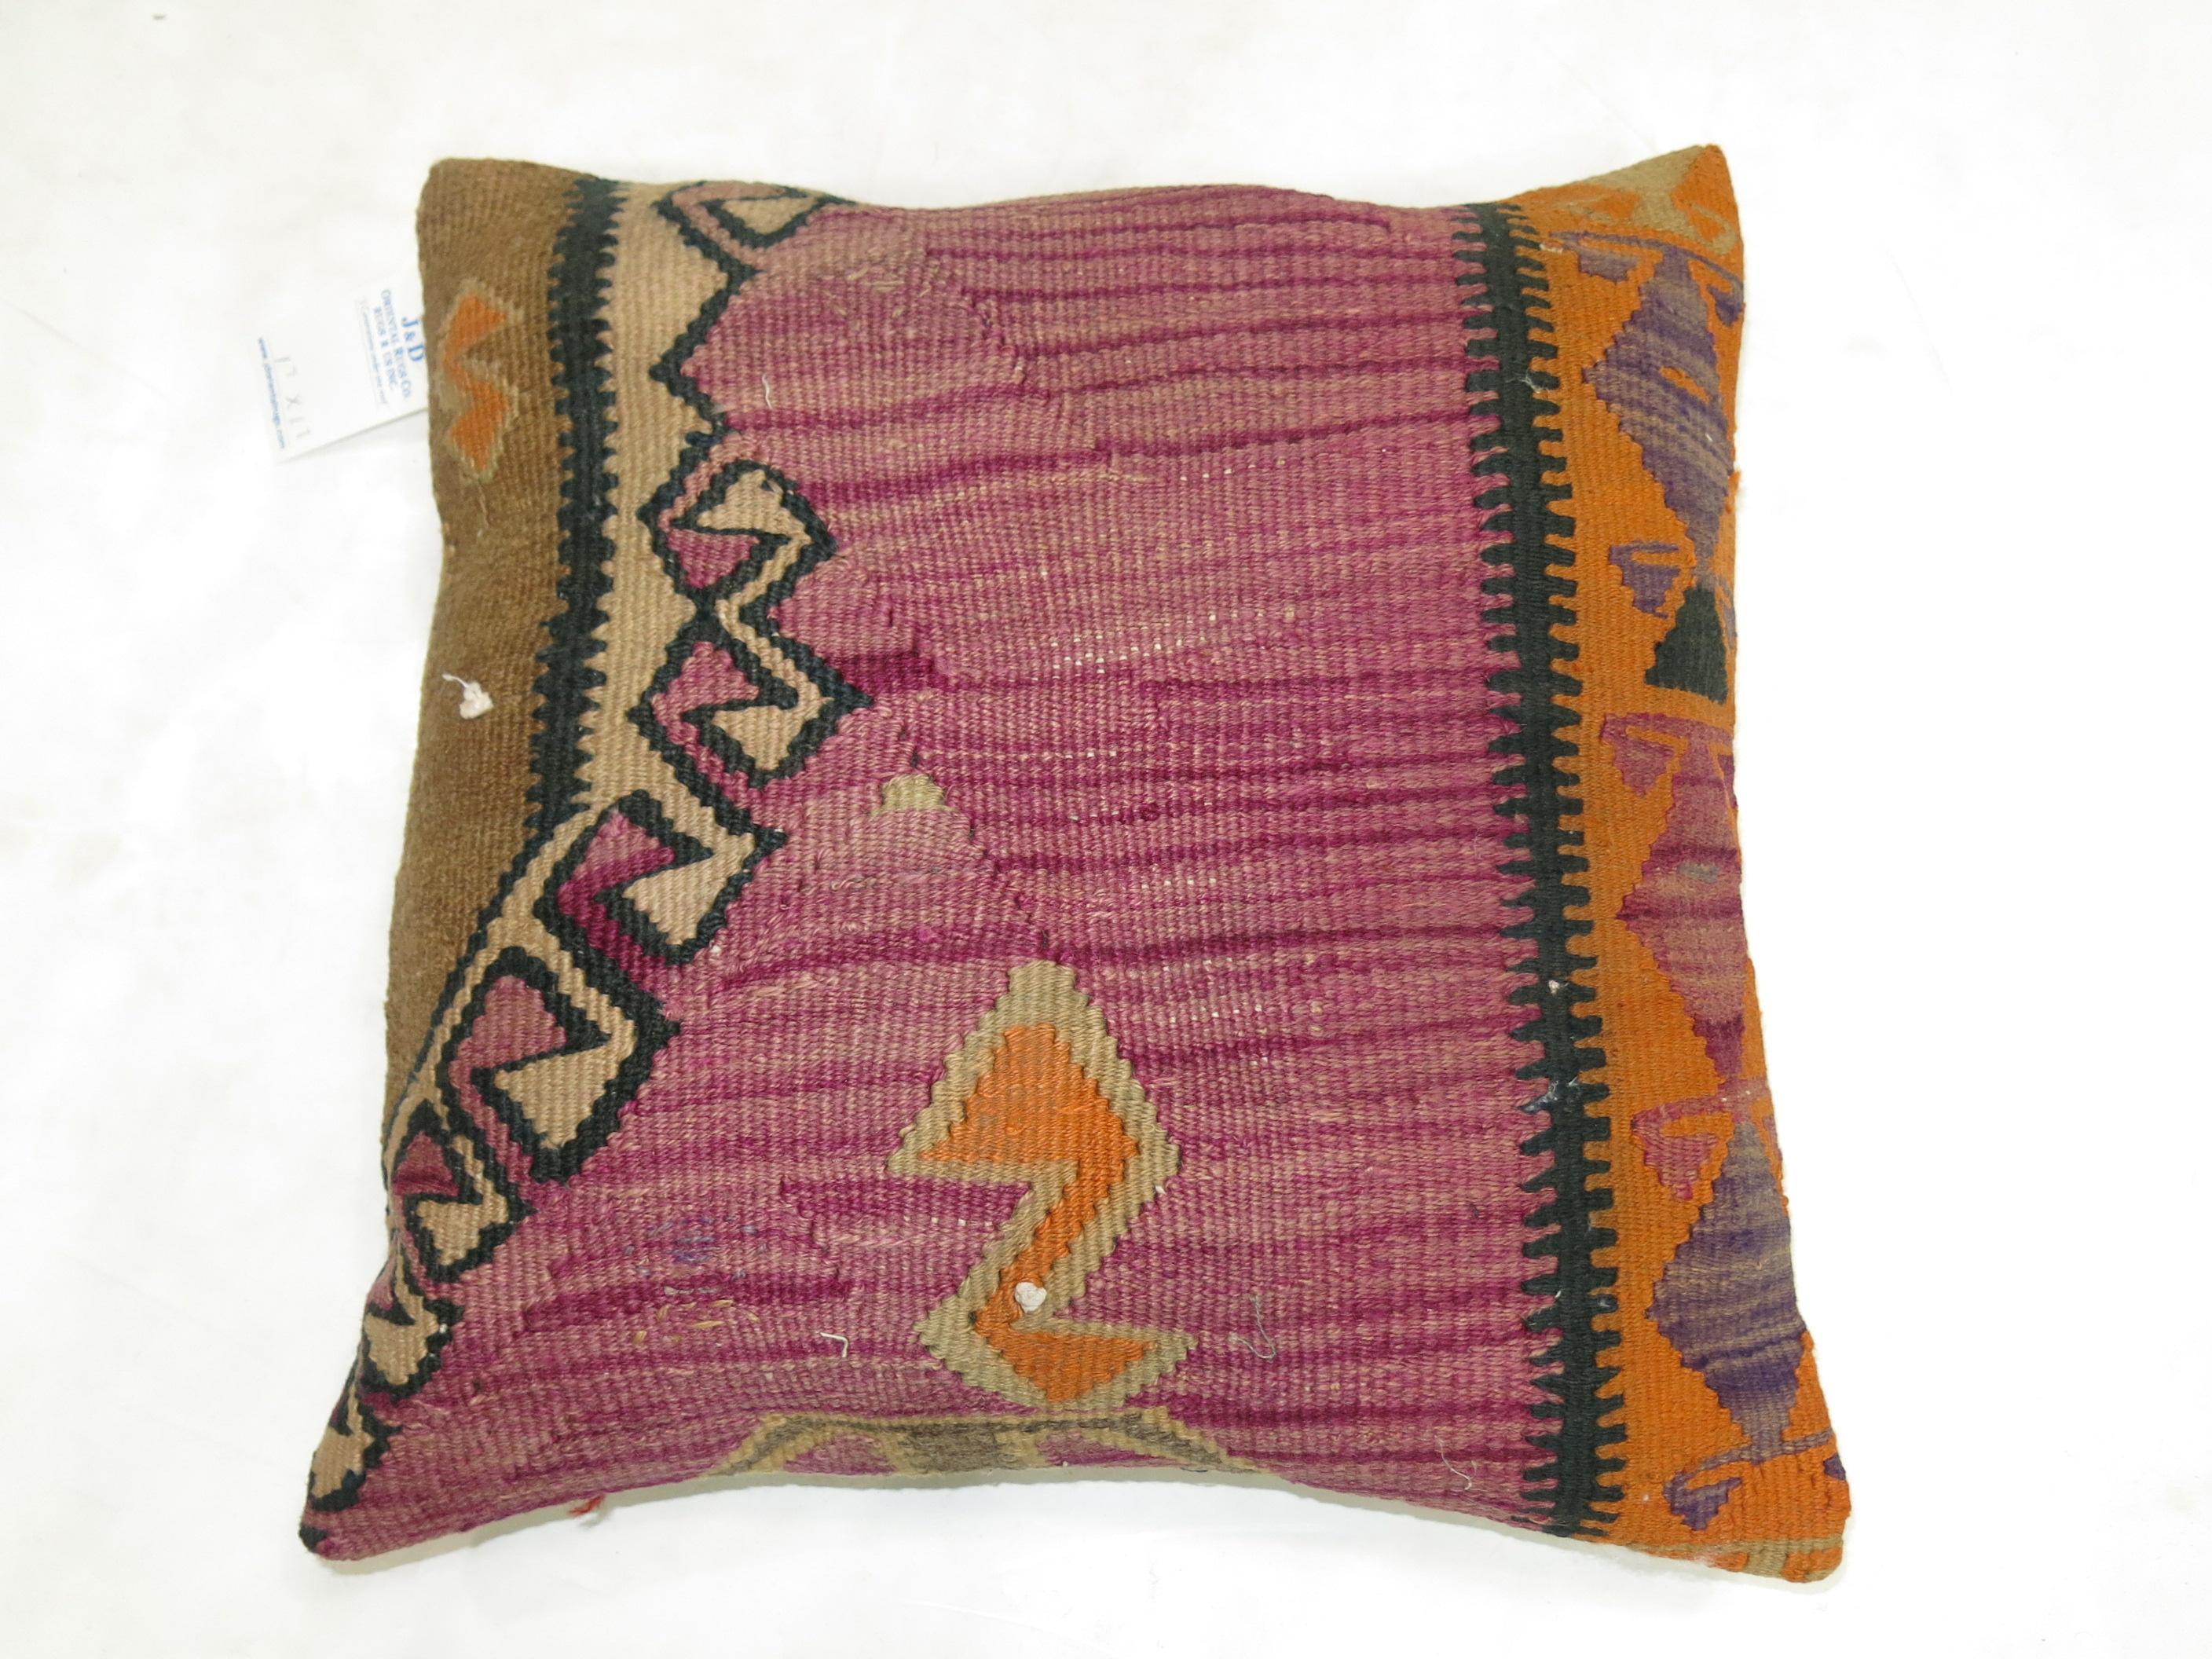 Pillow made from a vintage Turkish Kilim flat-weave. 19